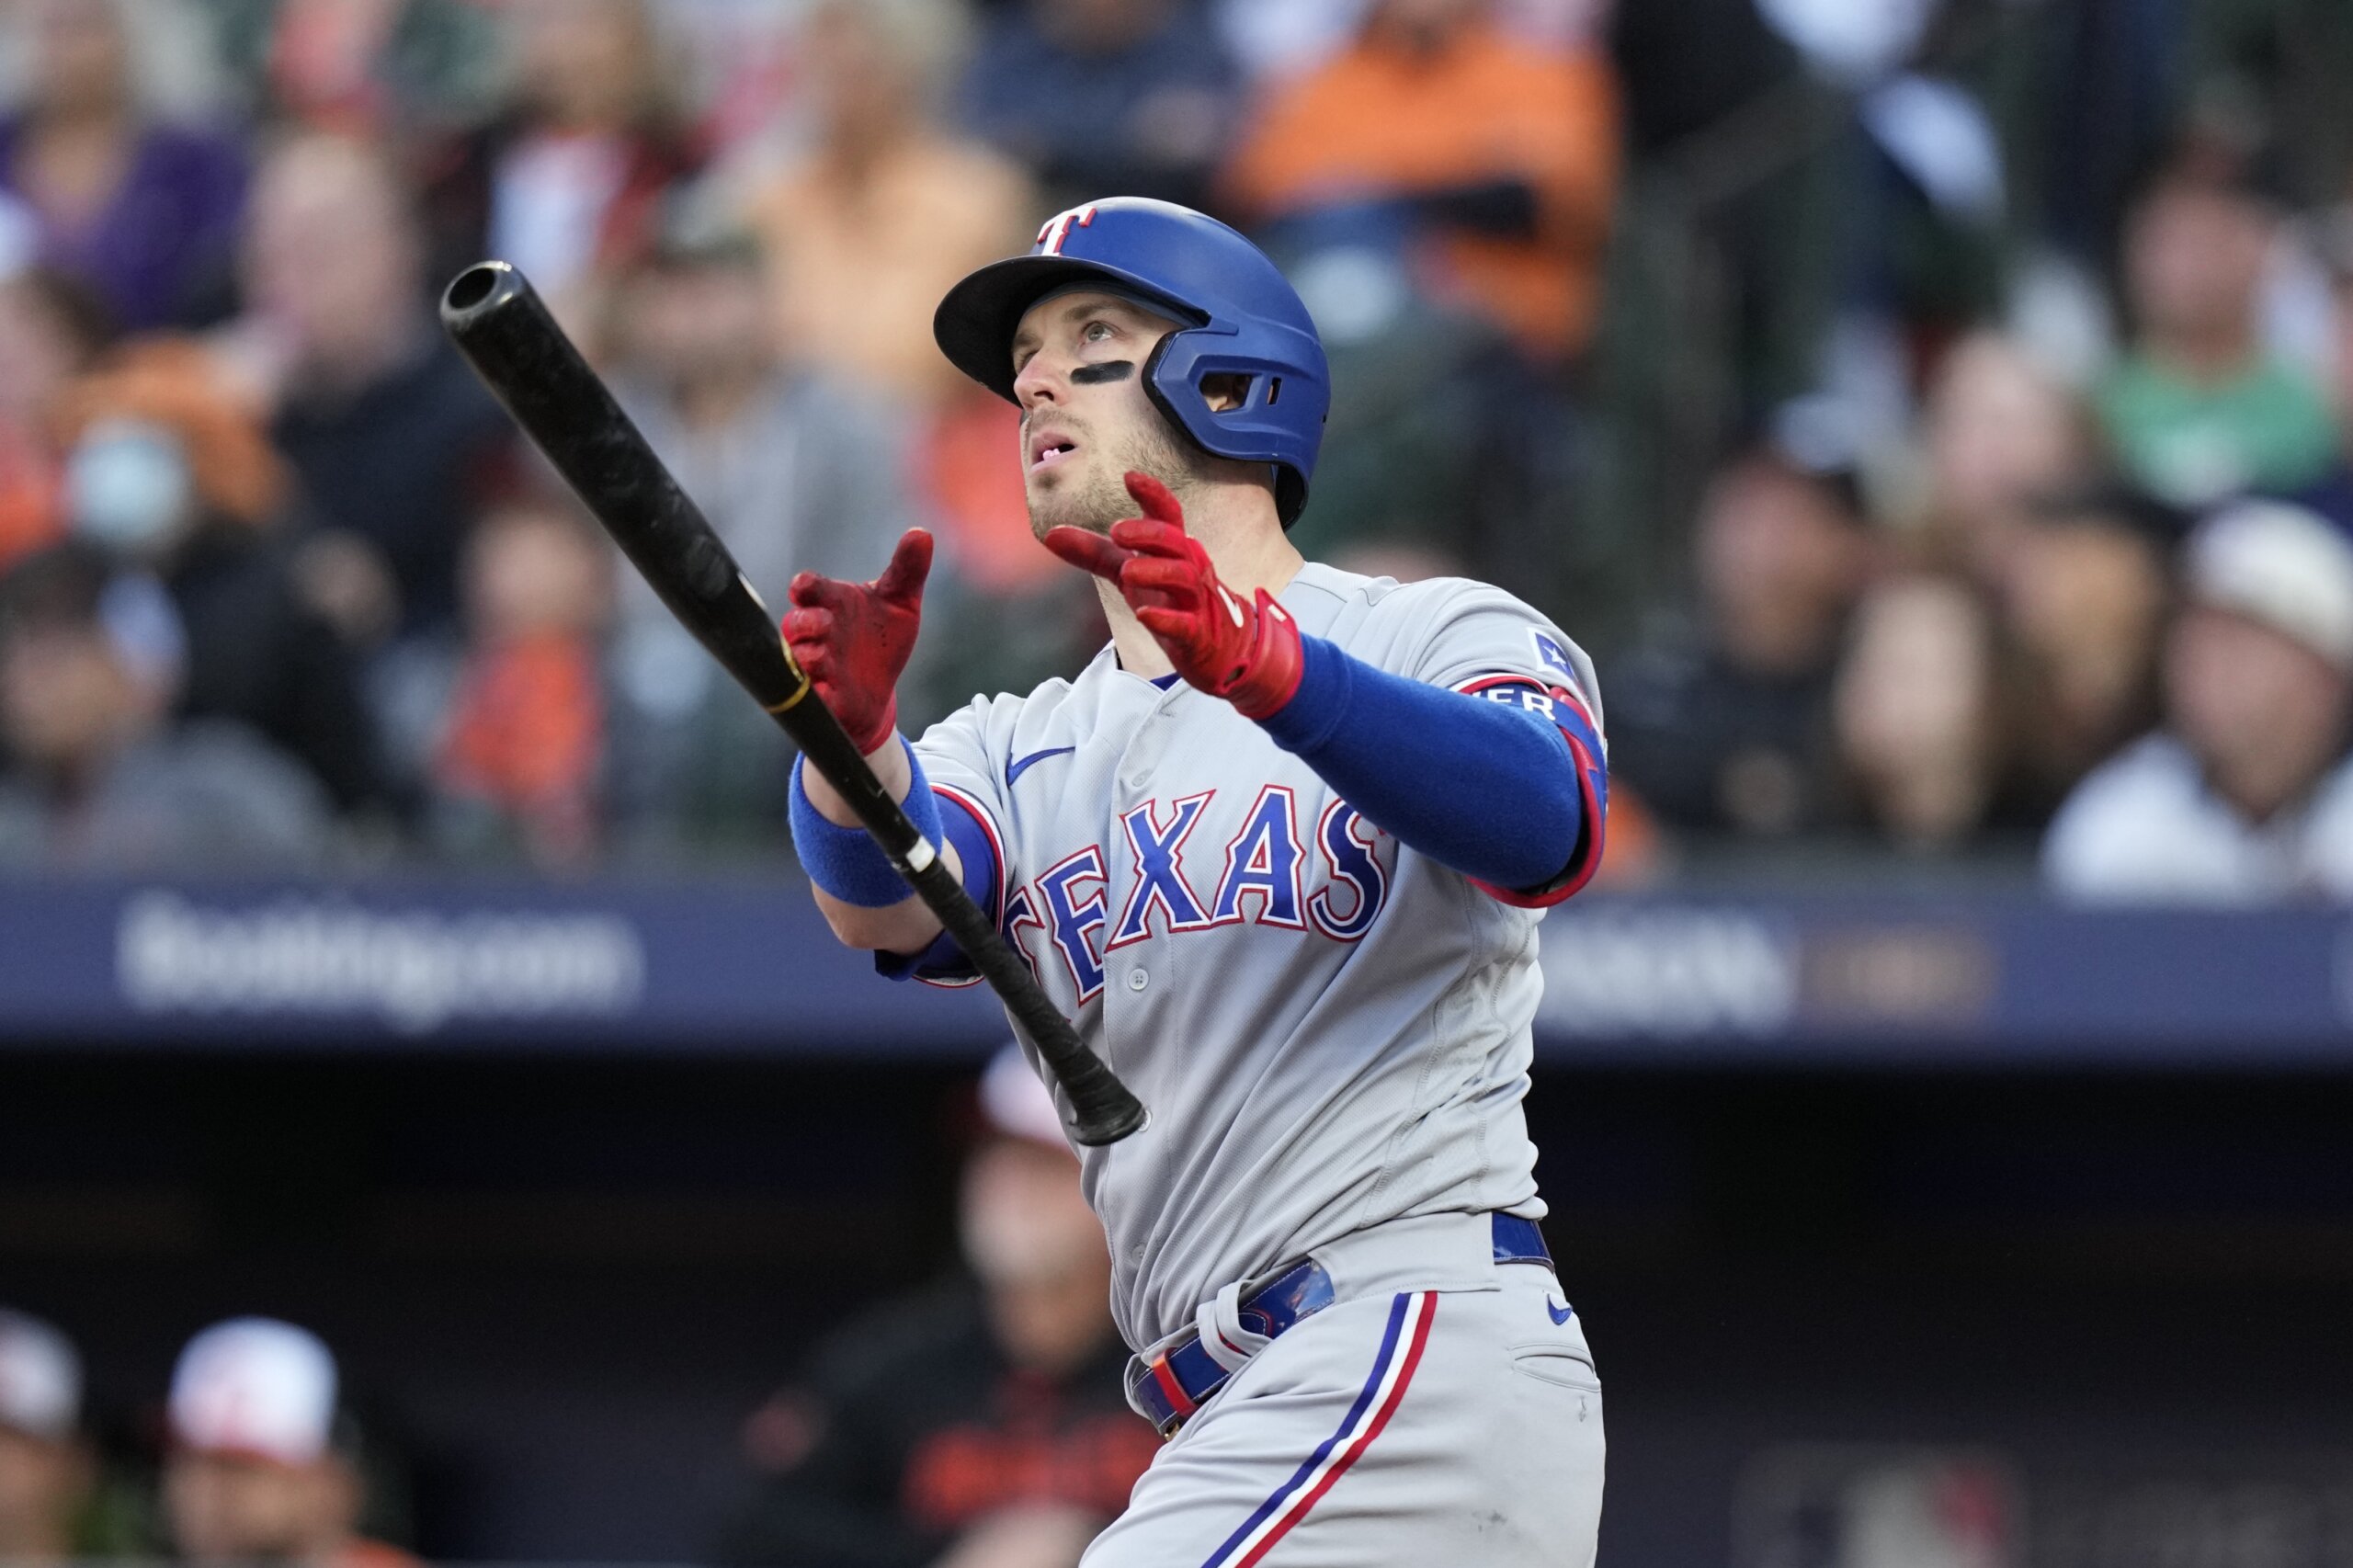 Nathan Eovaldi 3-hitter leads Rangers over Yankees 2-0 as Judge